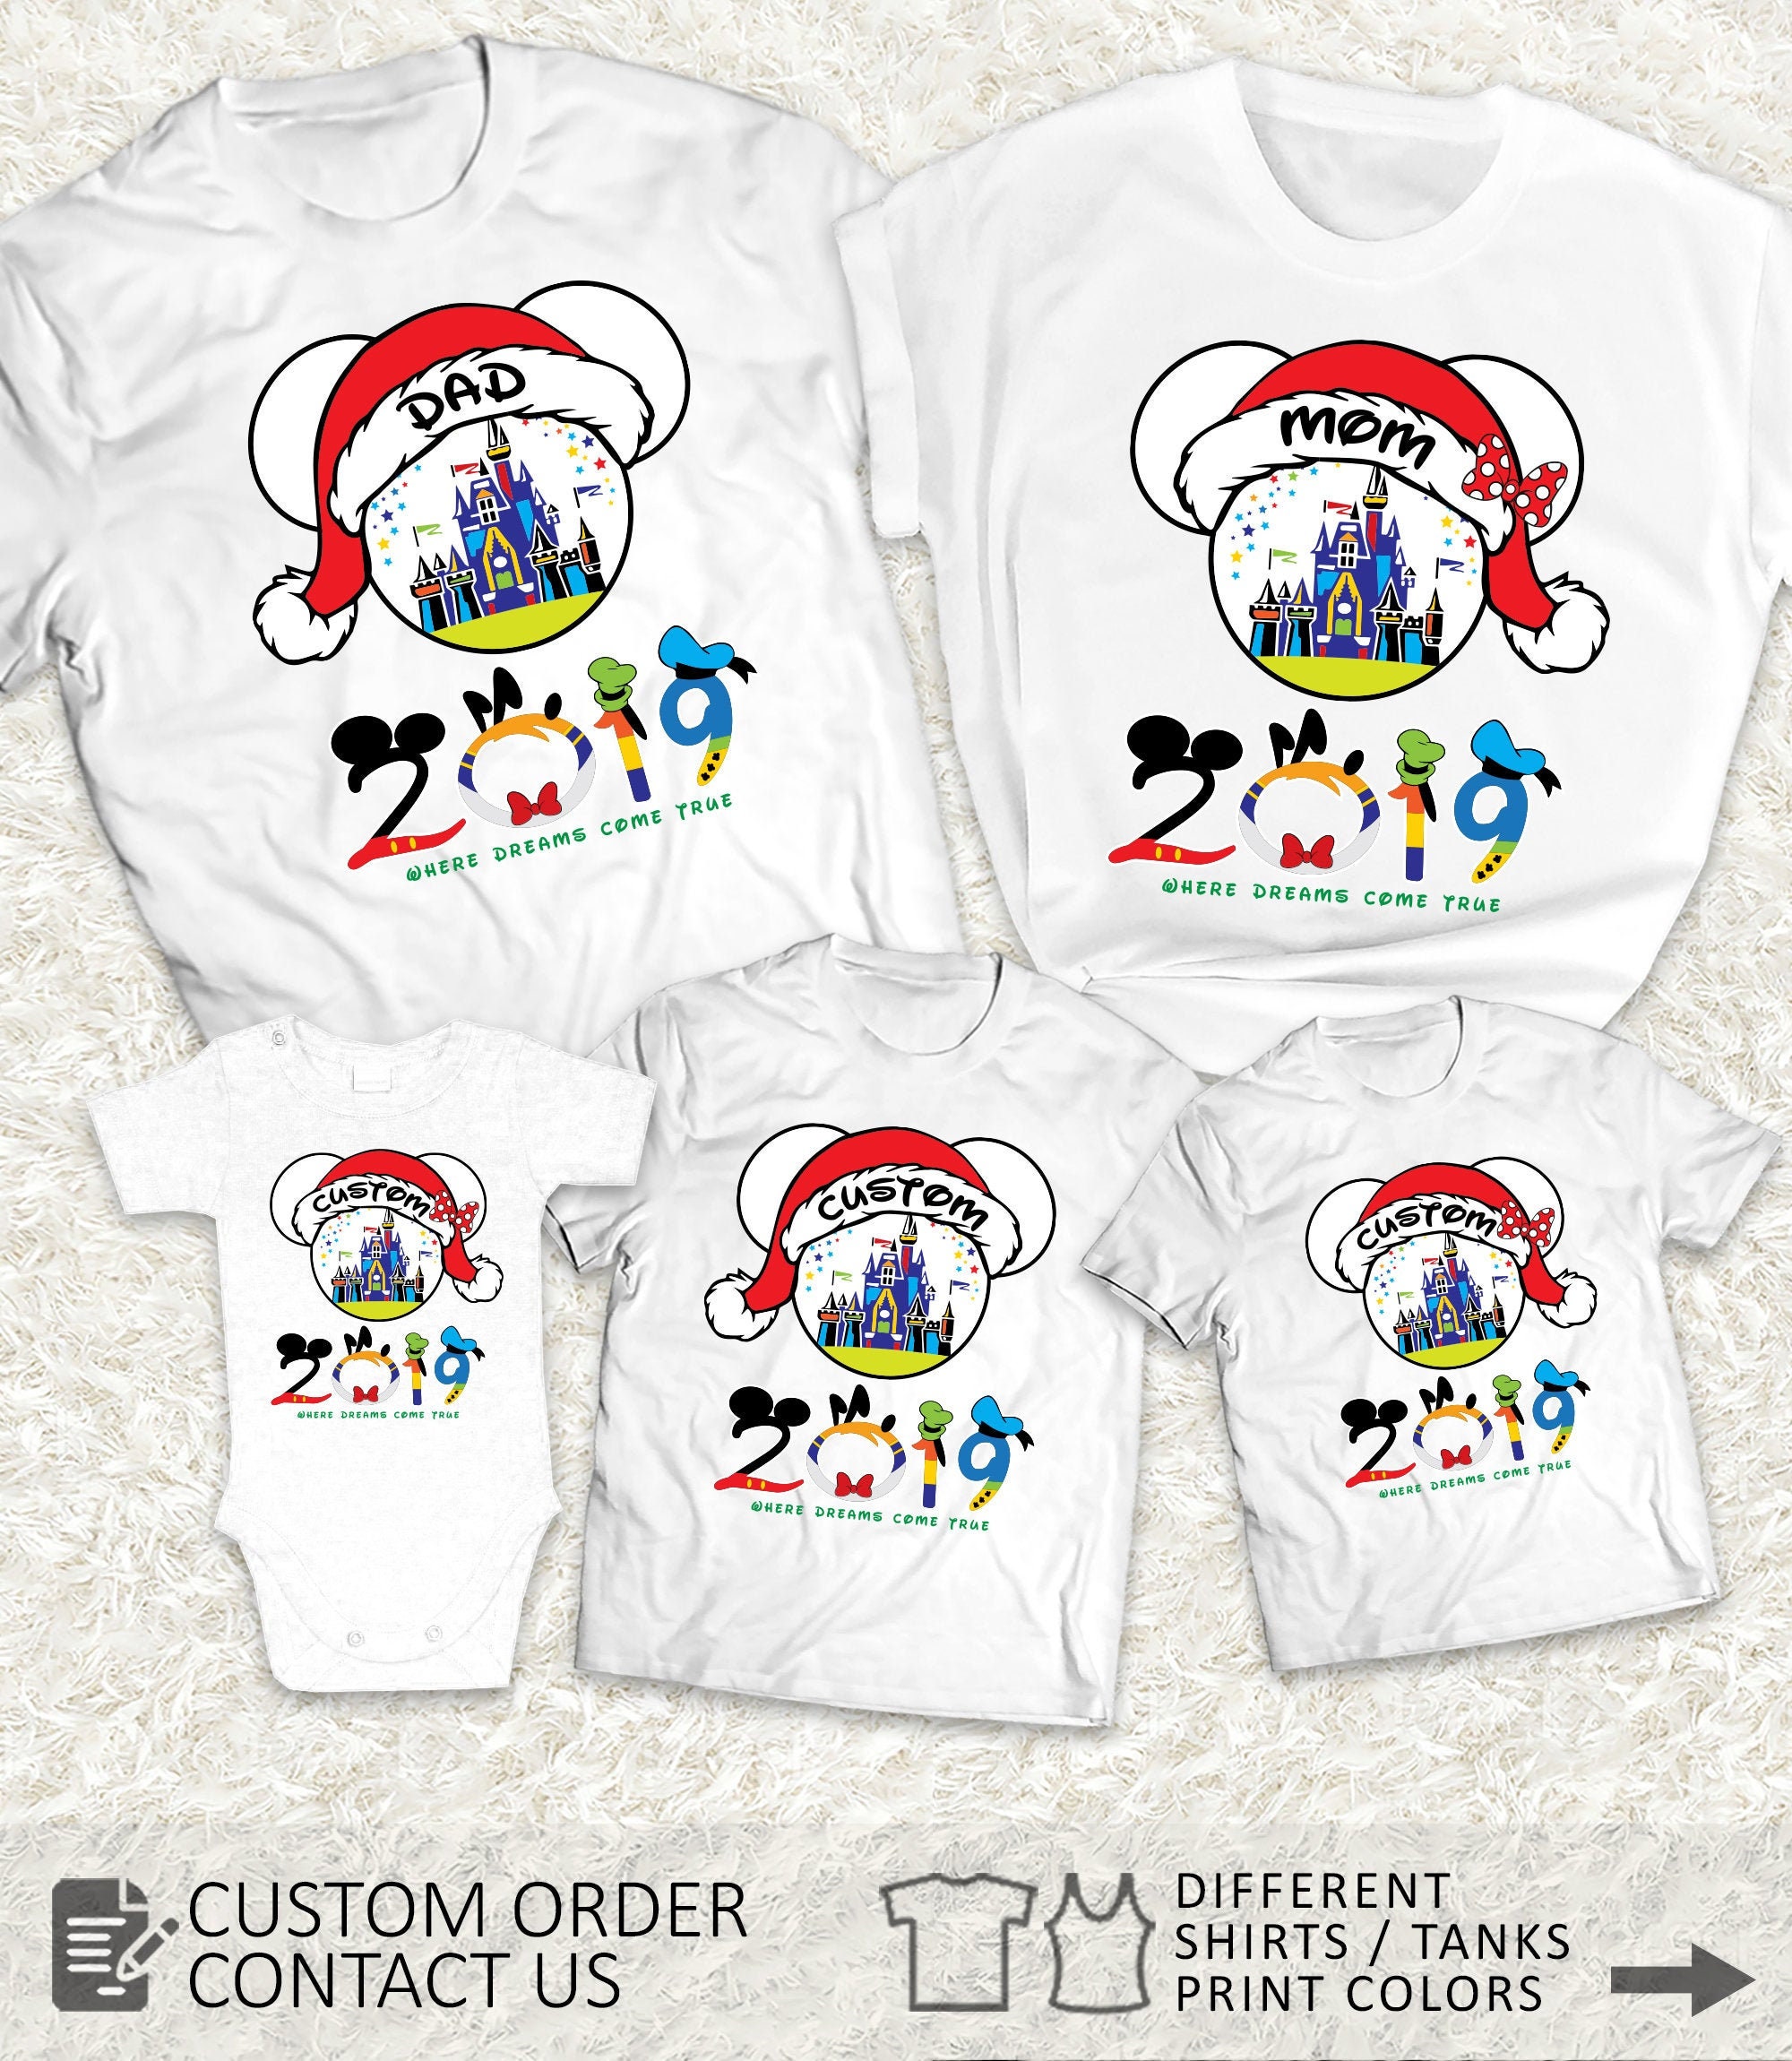 Xmas Disney family matching shirts,Minnie shirts from 6 Months up to Adults 4XL Disney Christmas 2018 matching Family shirts with Mickey